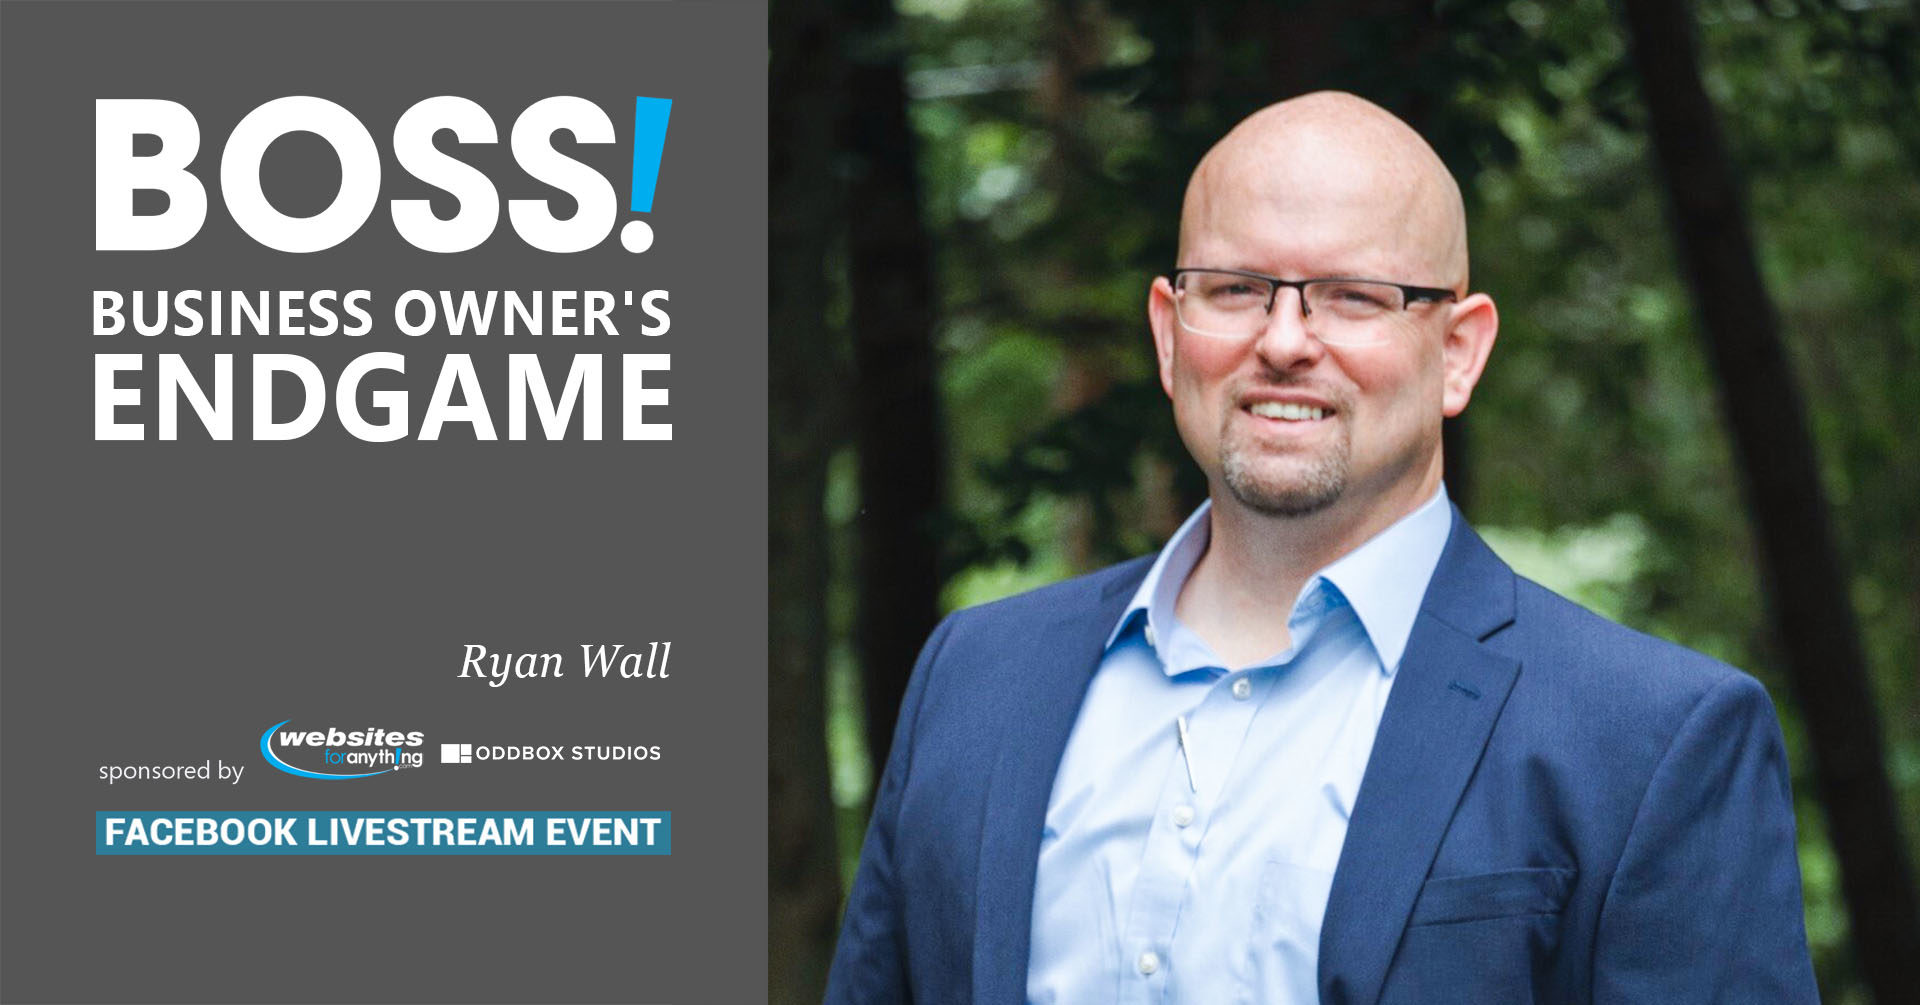 Business Owner's Endgame with Ryan Wall at BOSS on November 10th 2020